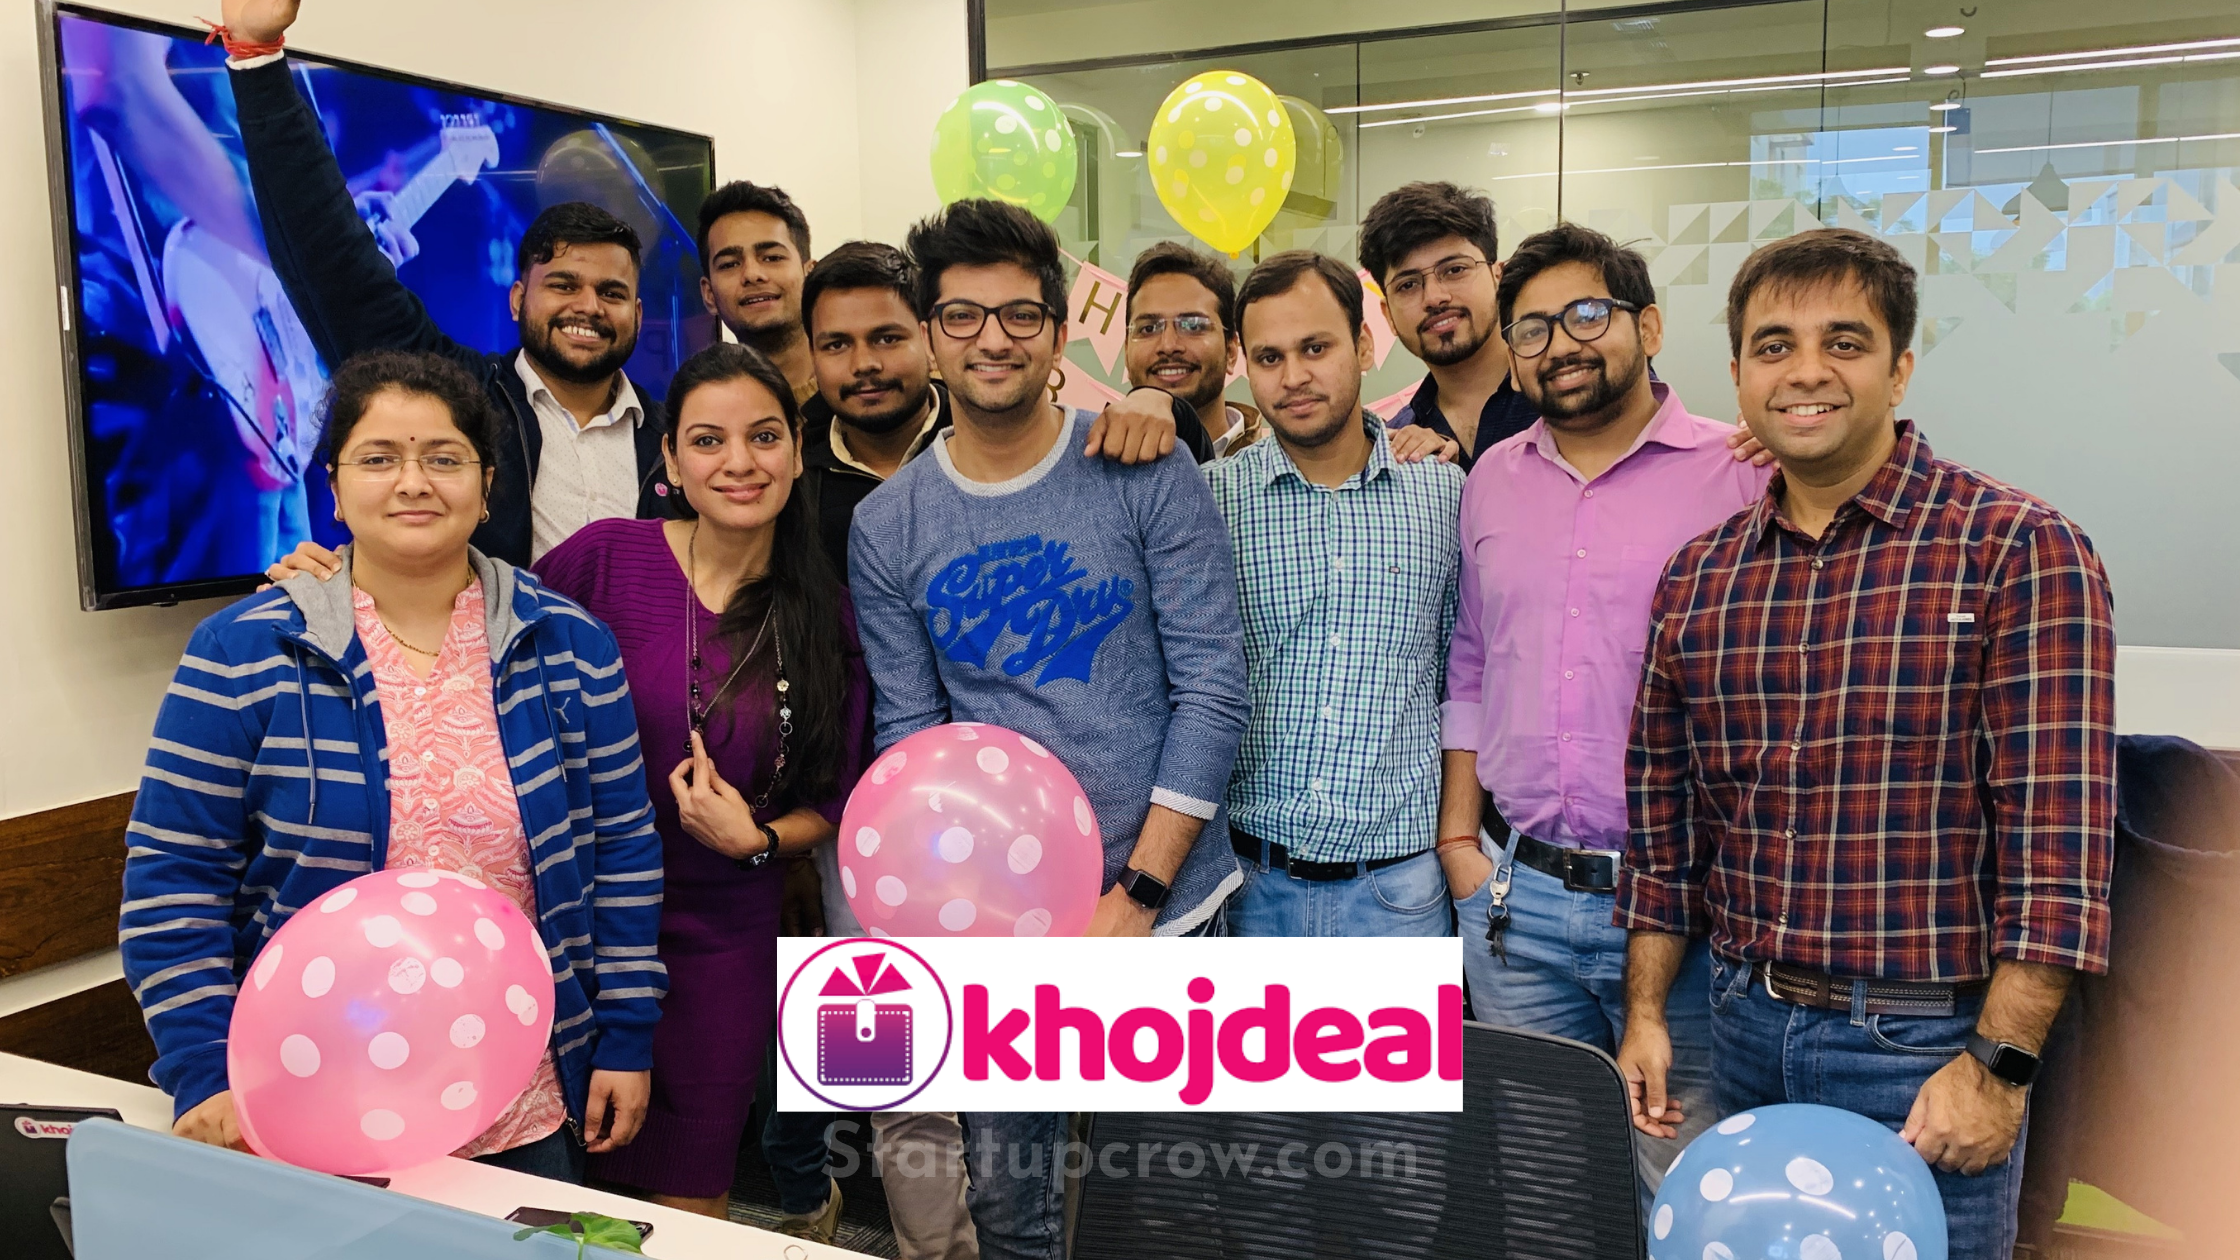 Khojdeal brand story with vaibhav lall founder of Khojdeal